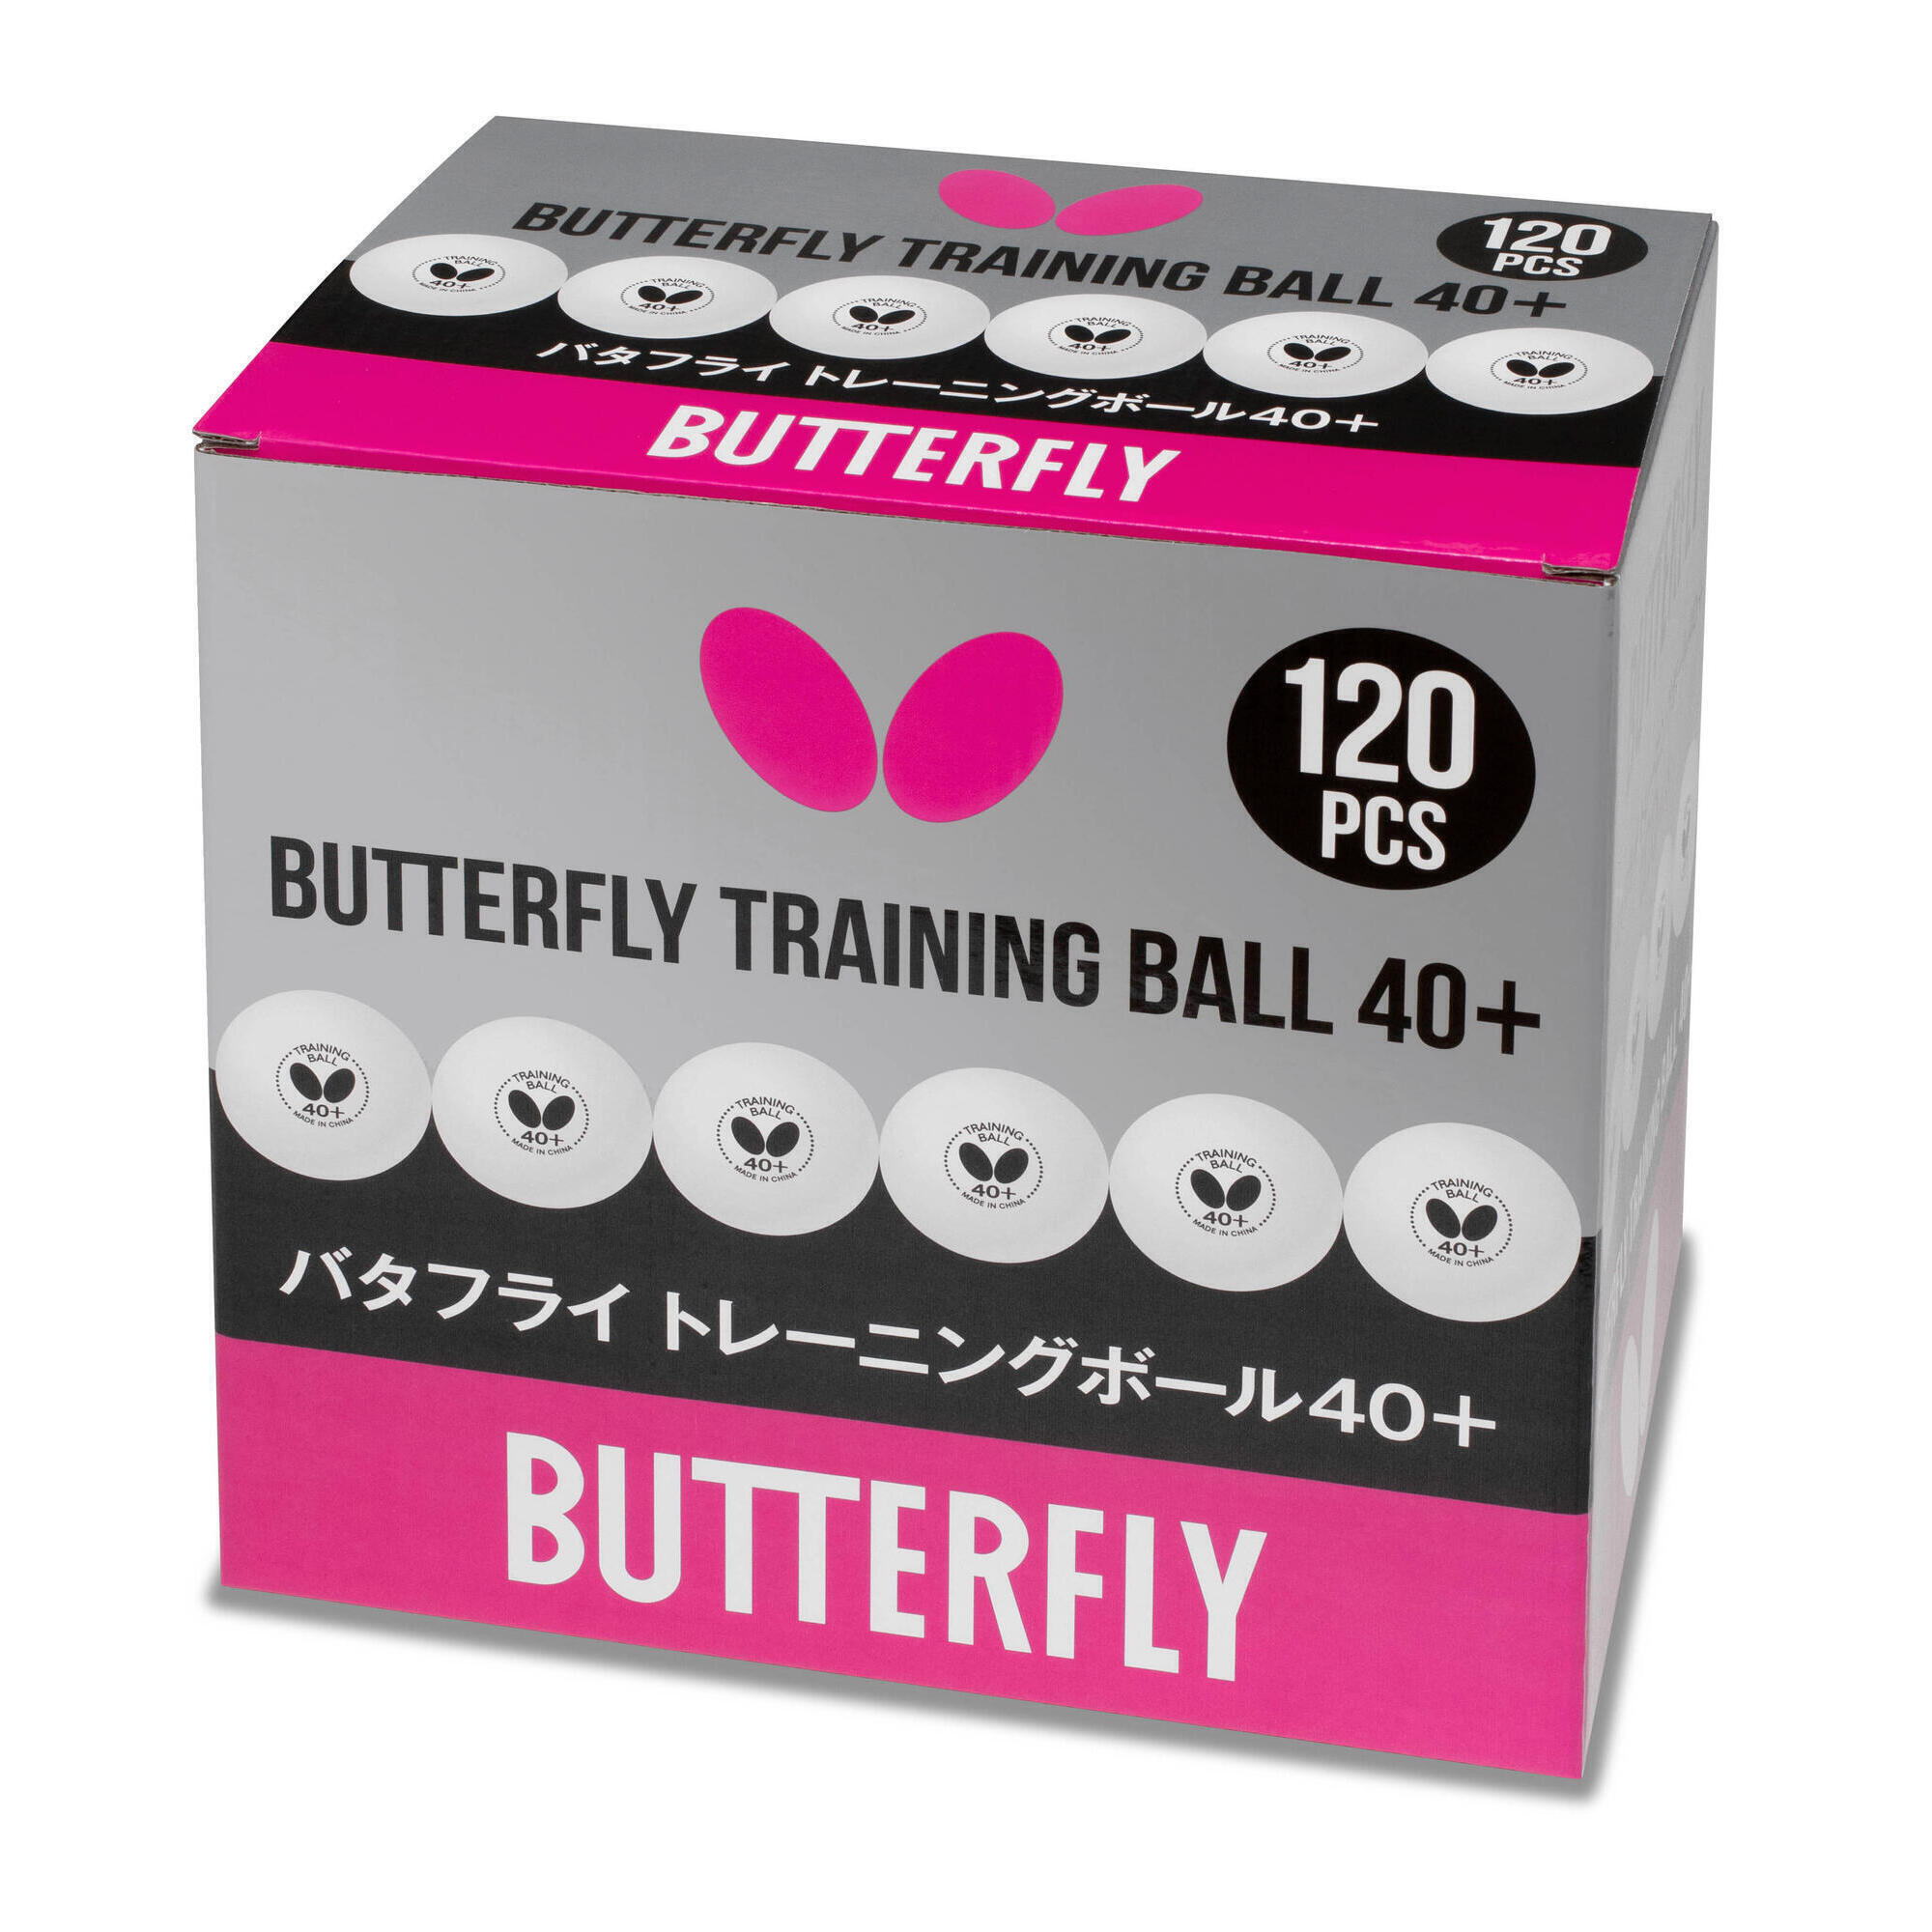 Butterfly Training Ball 40+ (Box of 120) 1/2